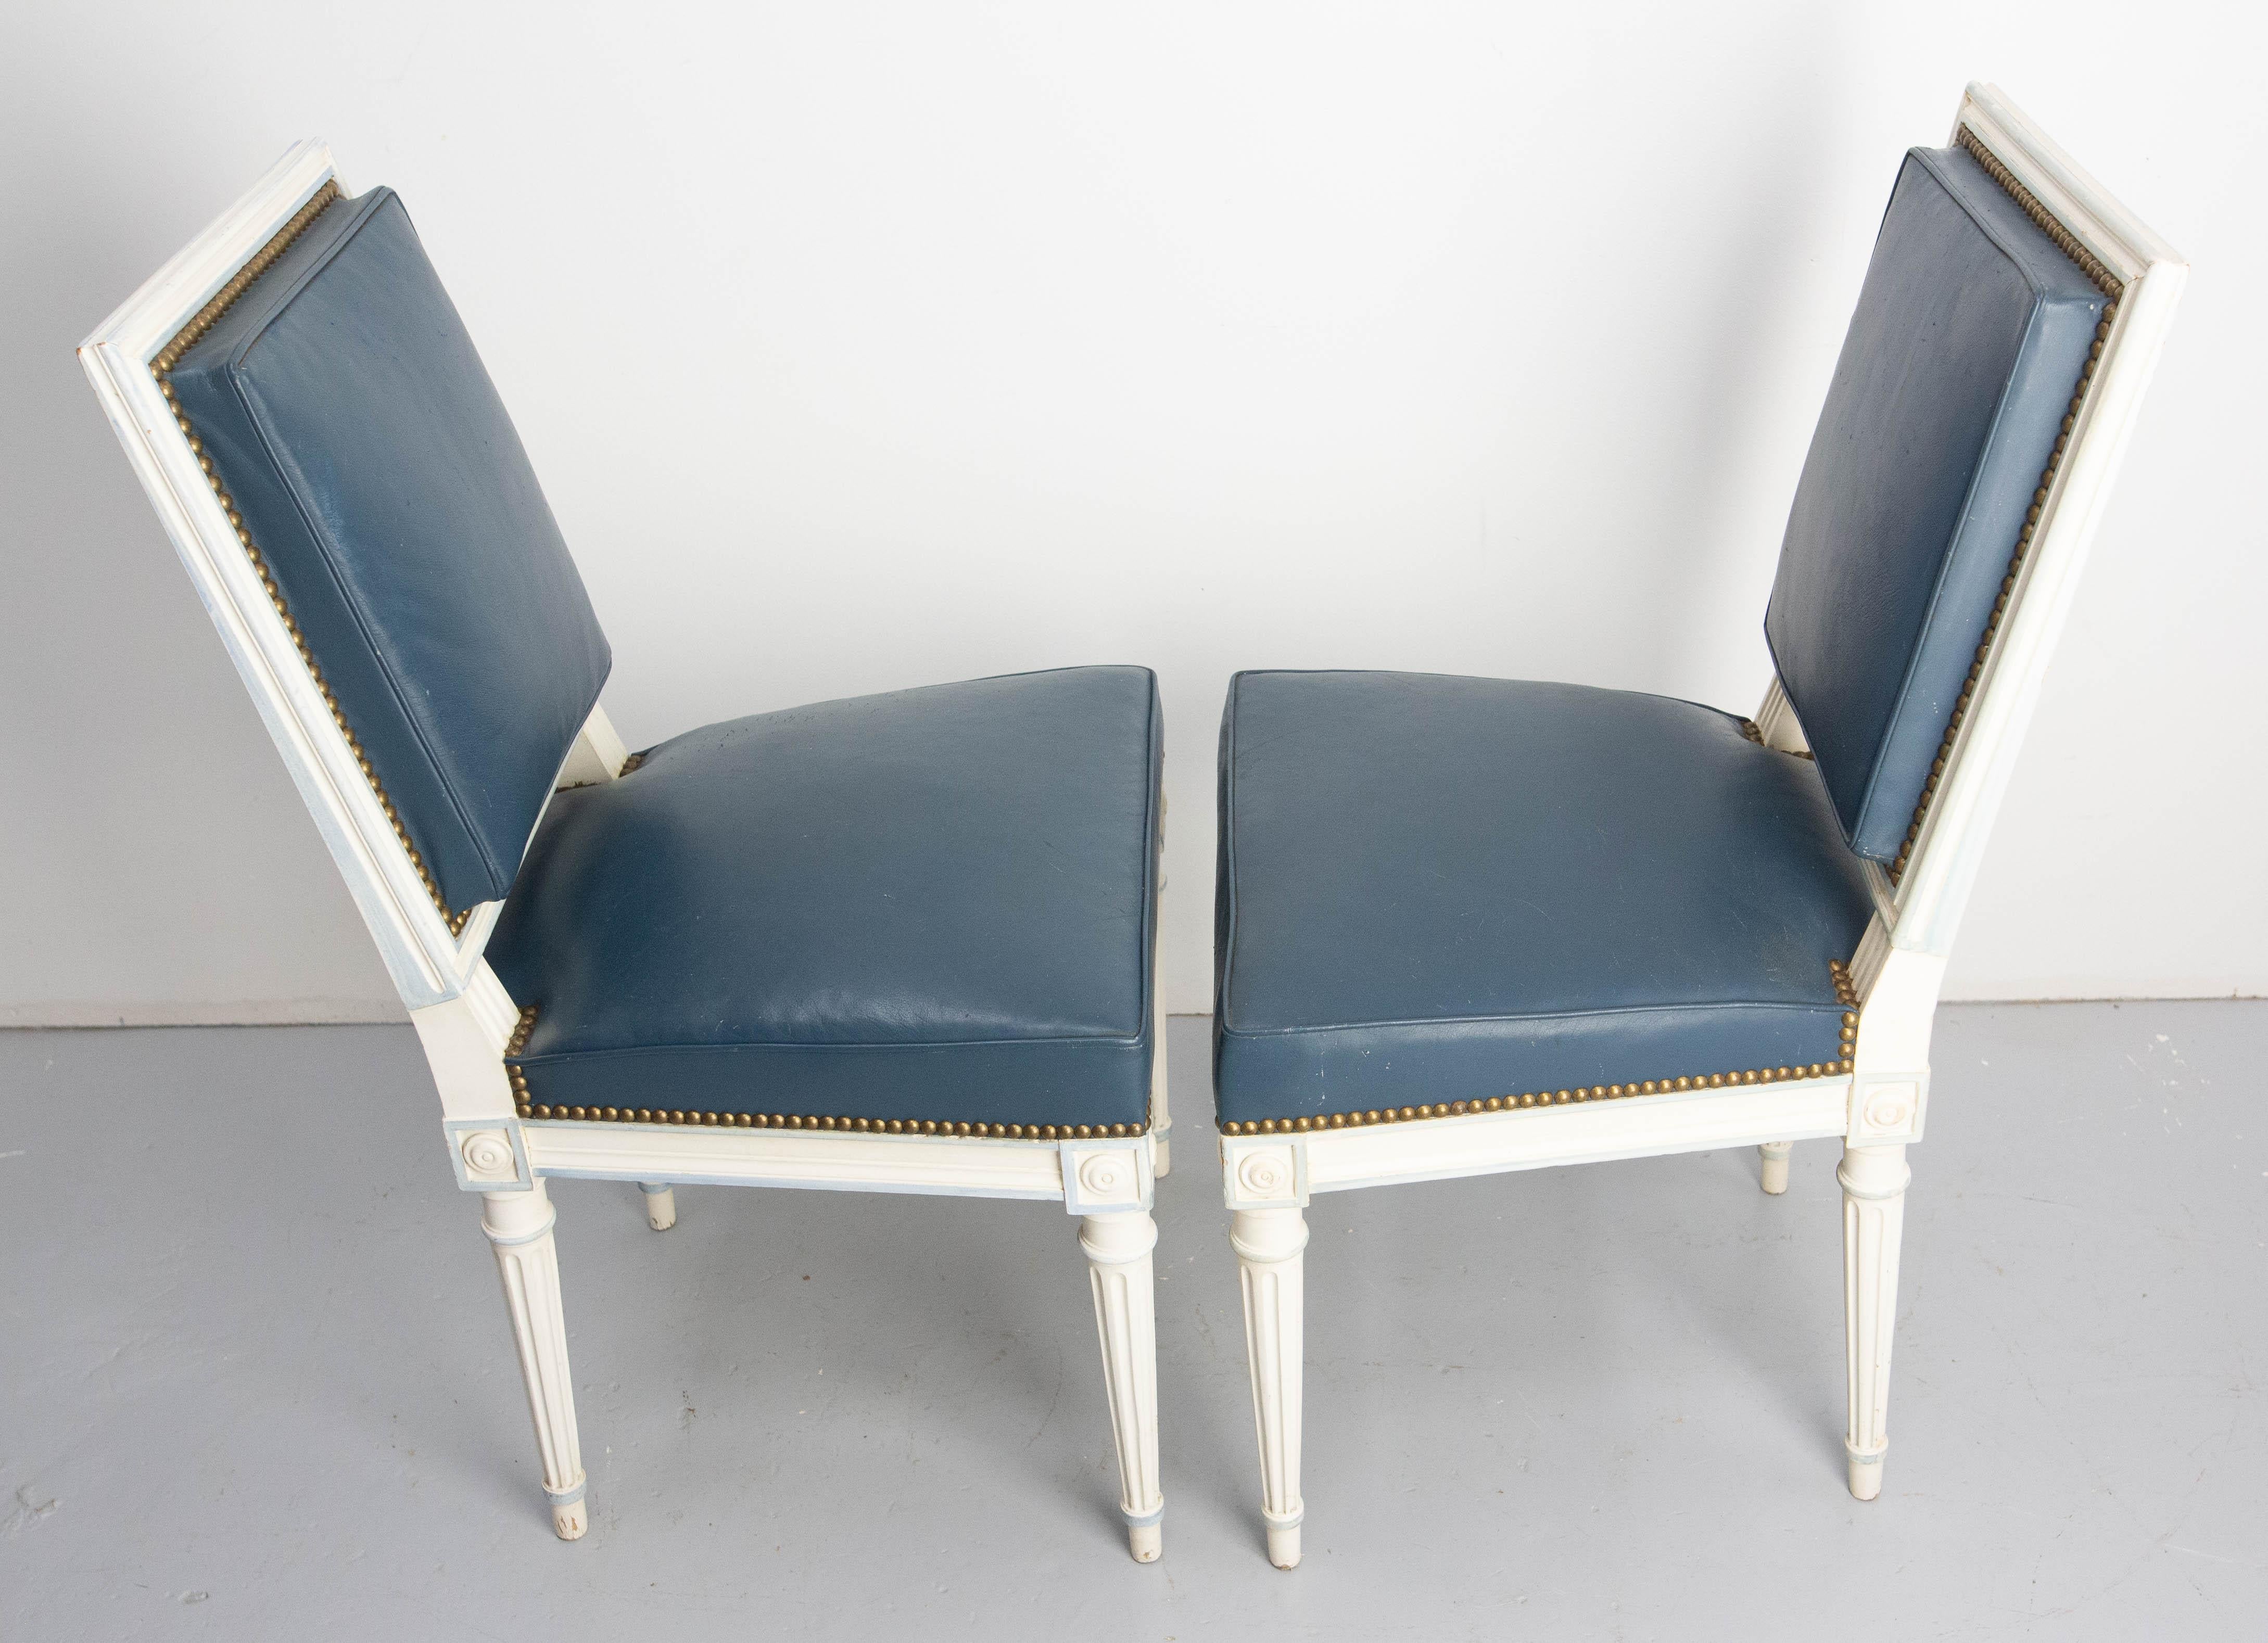 Six Dining Chairs Painted Wood & Blue Skai Louis 16 Style, Midcentury French For Sale 1